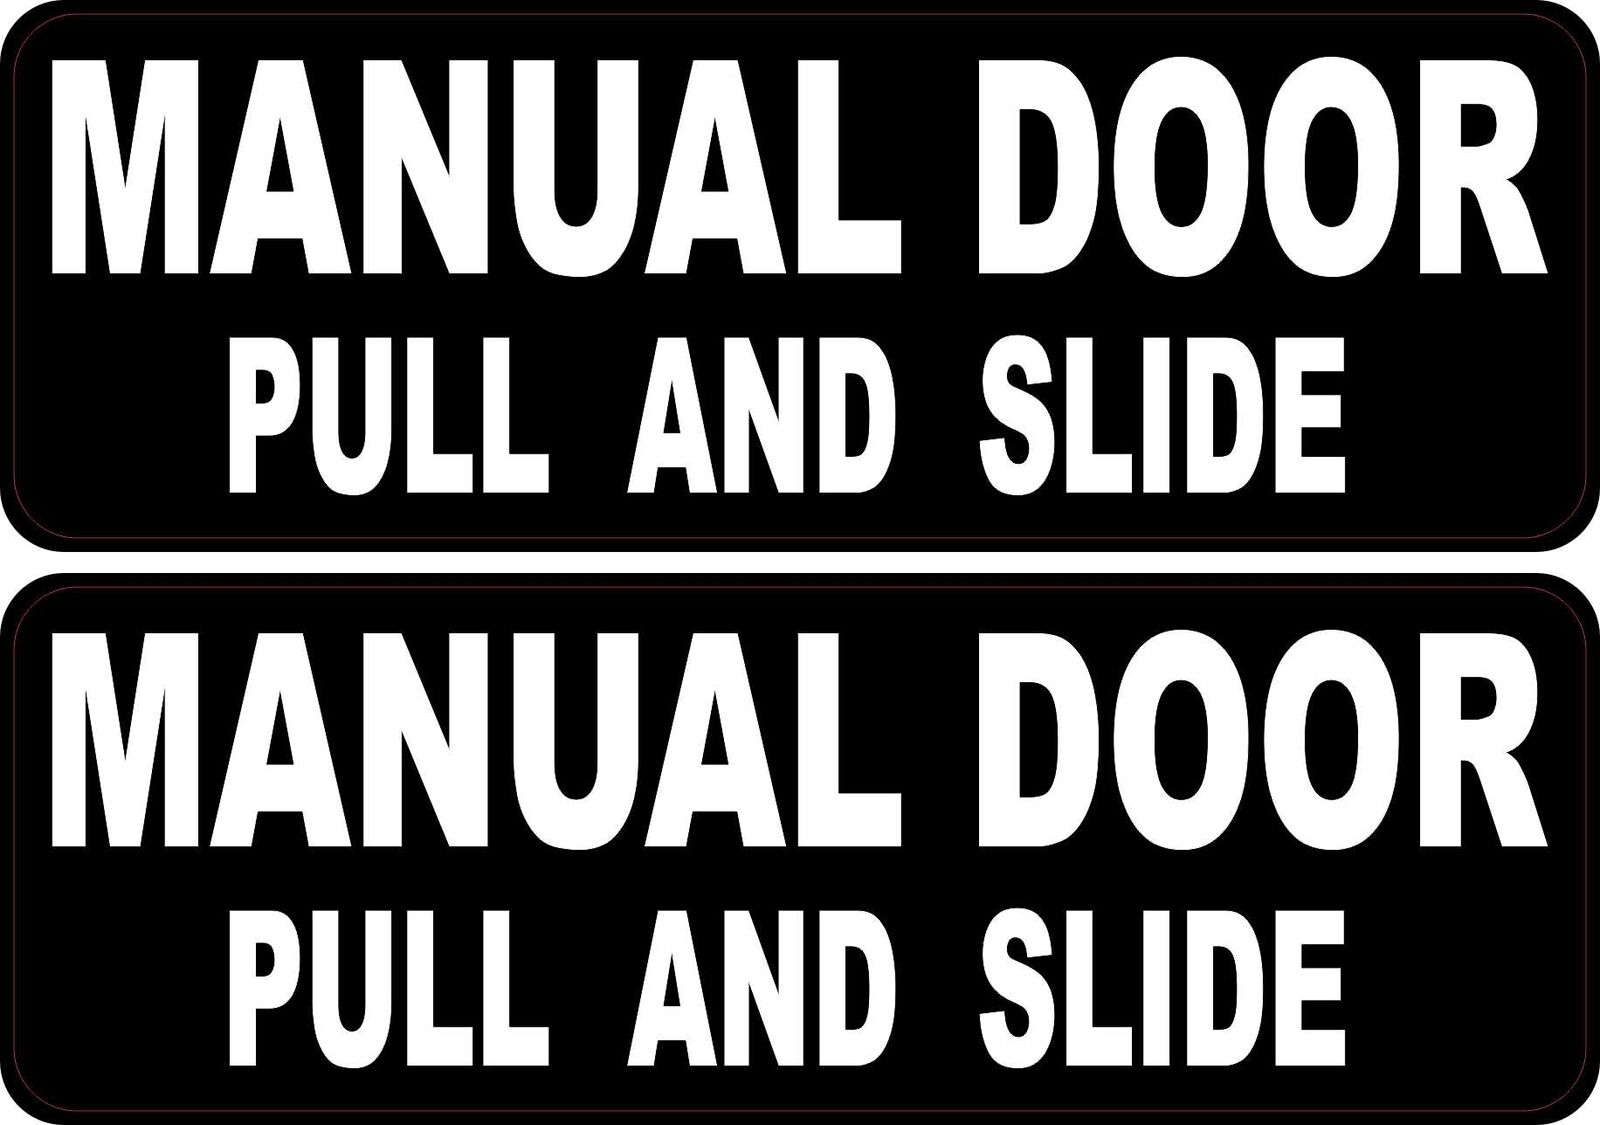 StickerTalk Manual Door Pull and Slide Sticker, 6 inches x 2 inches